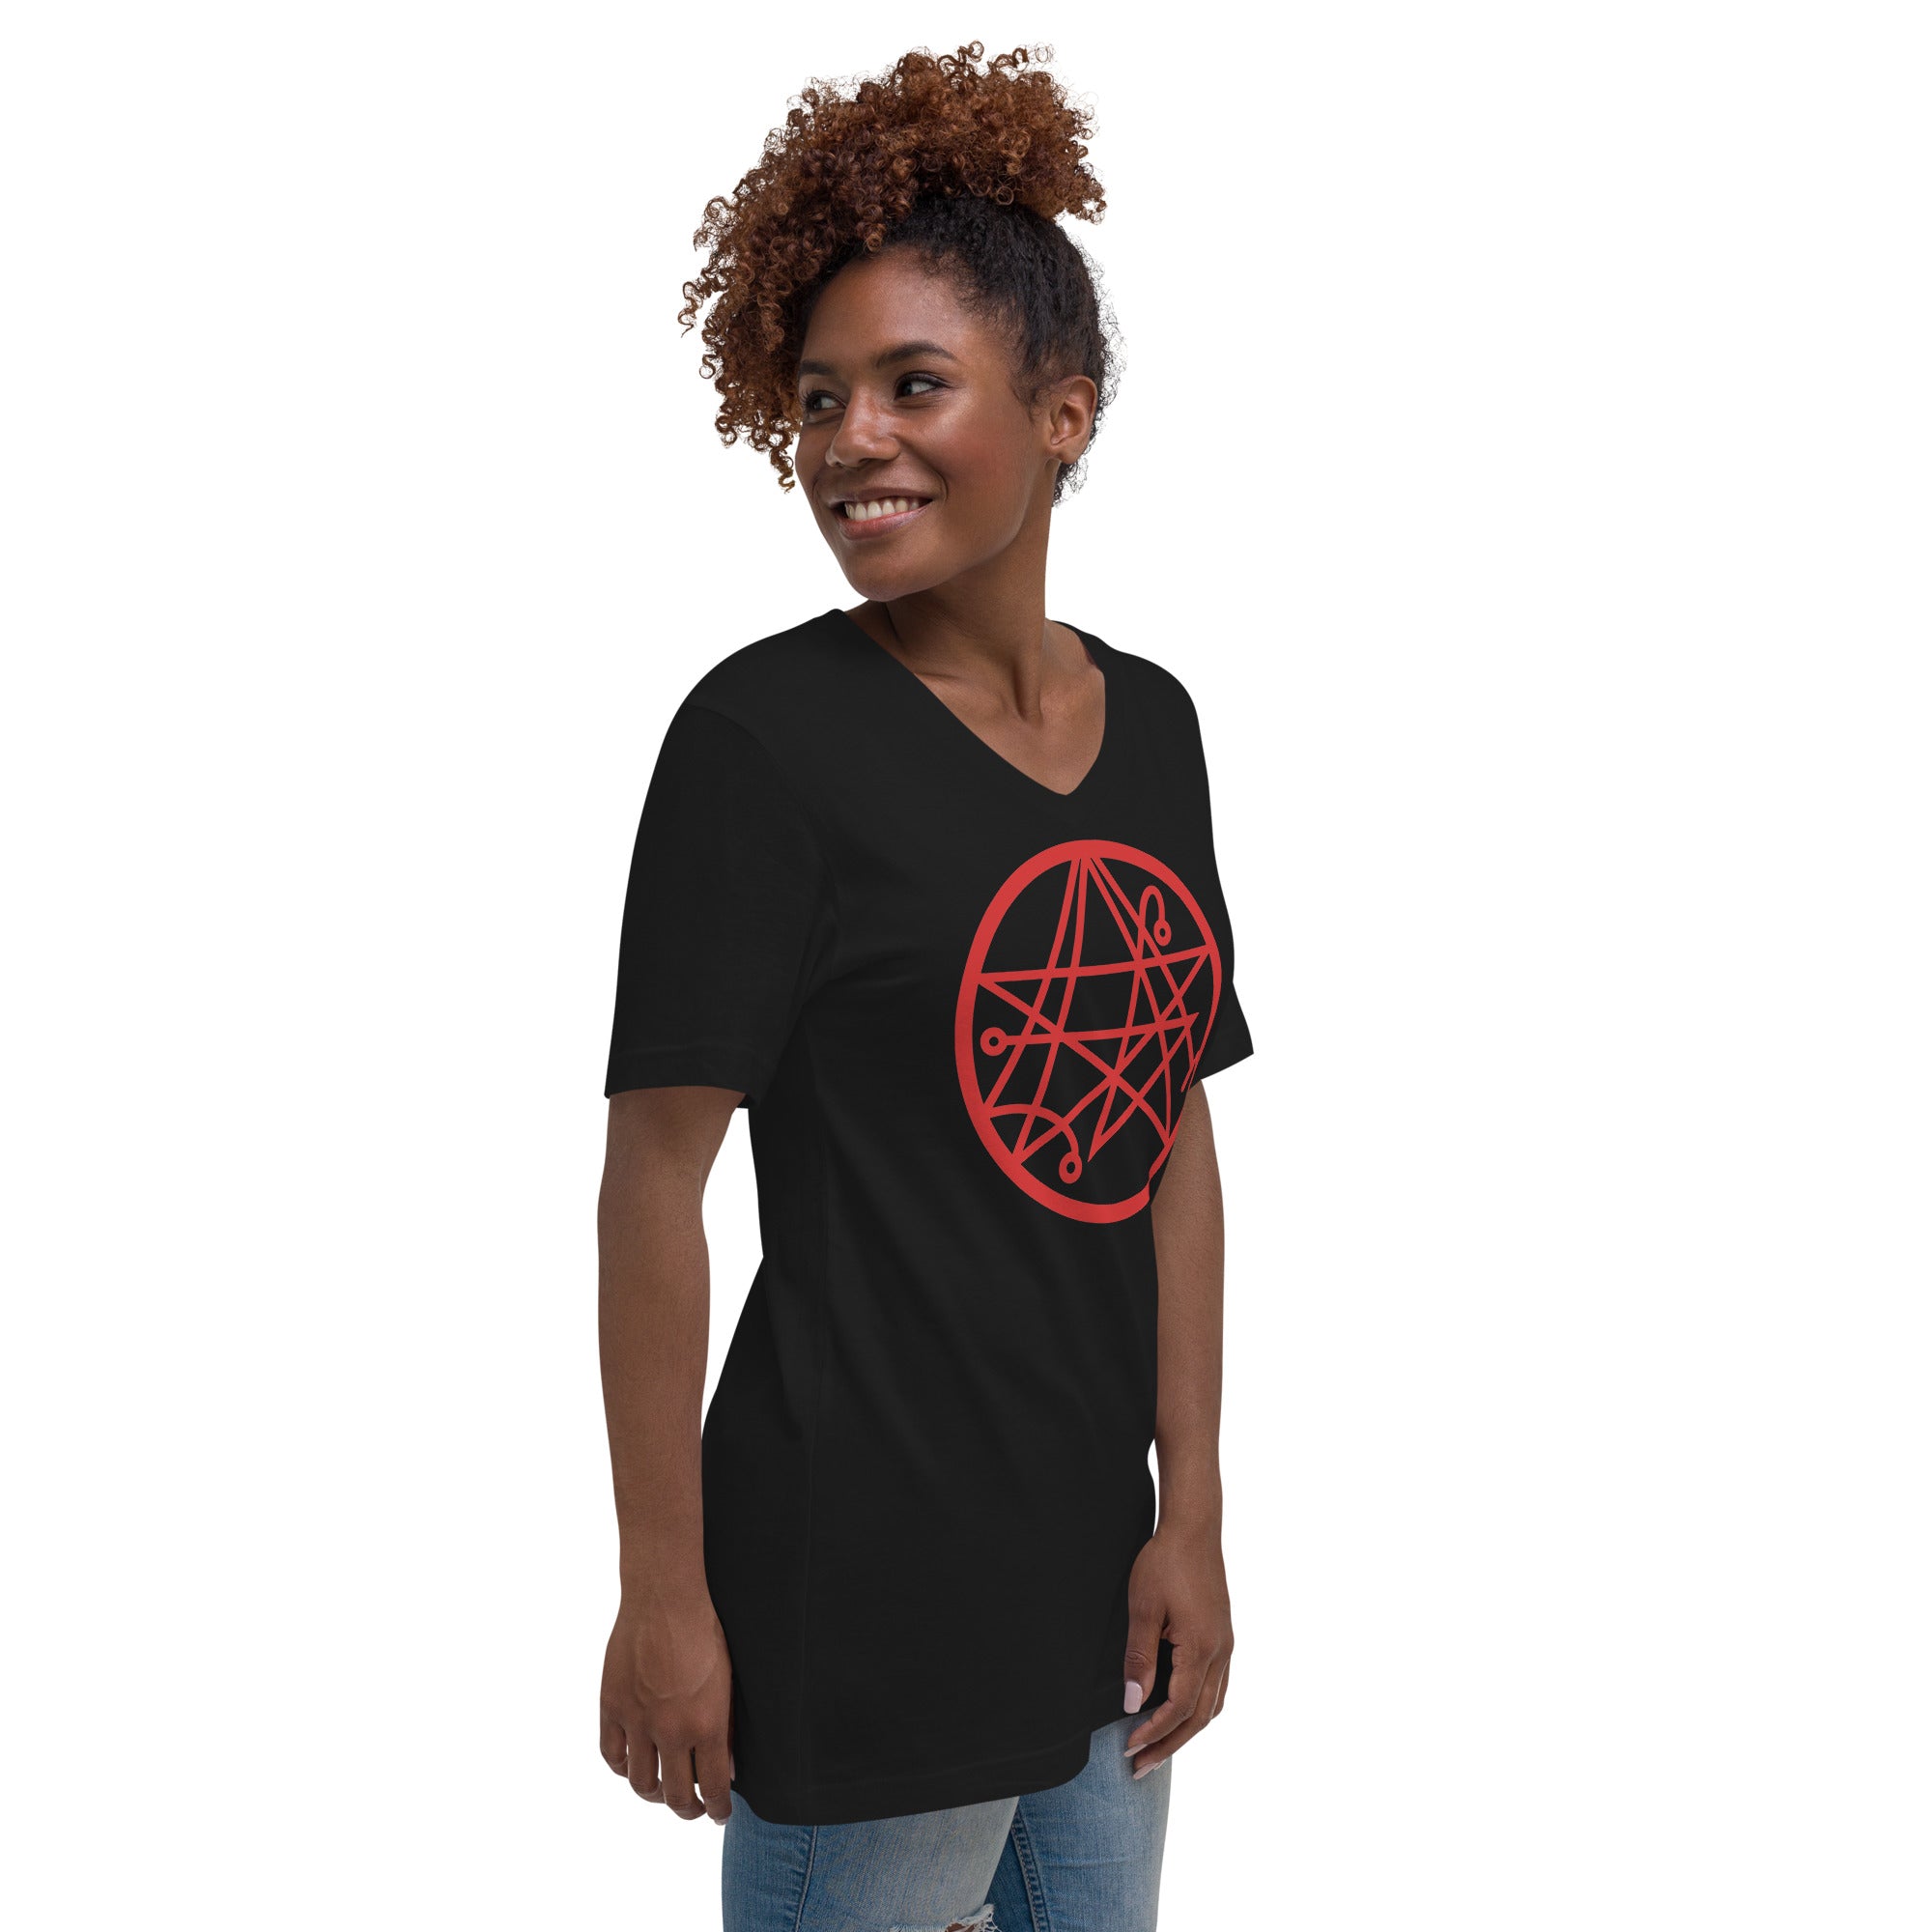 Necronomicon The Book of the Dead Occult Symbol Women’s Short Sleeve V-Neck T-Shirt - Edge of Life Designs